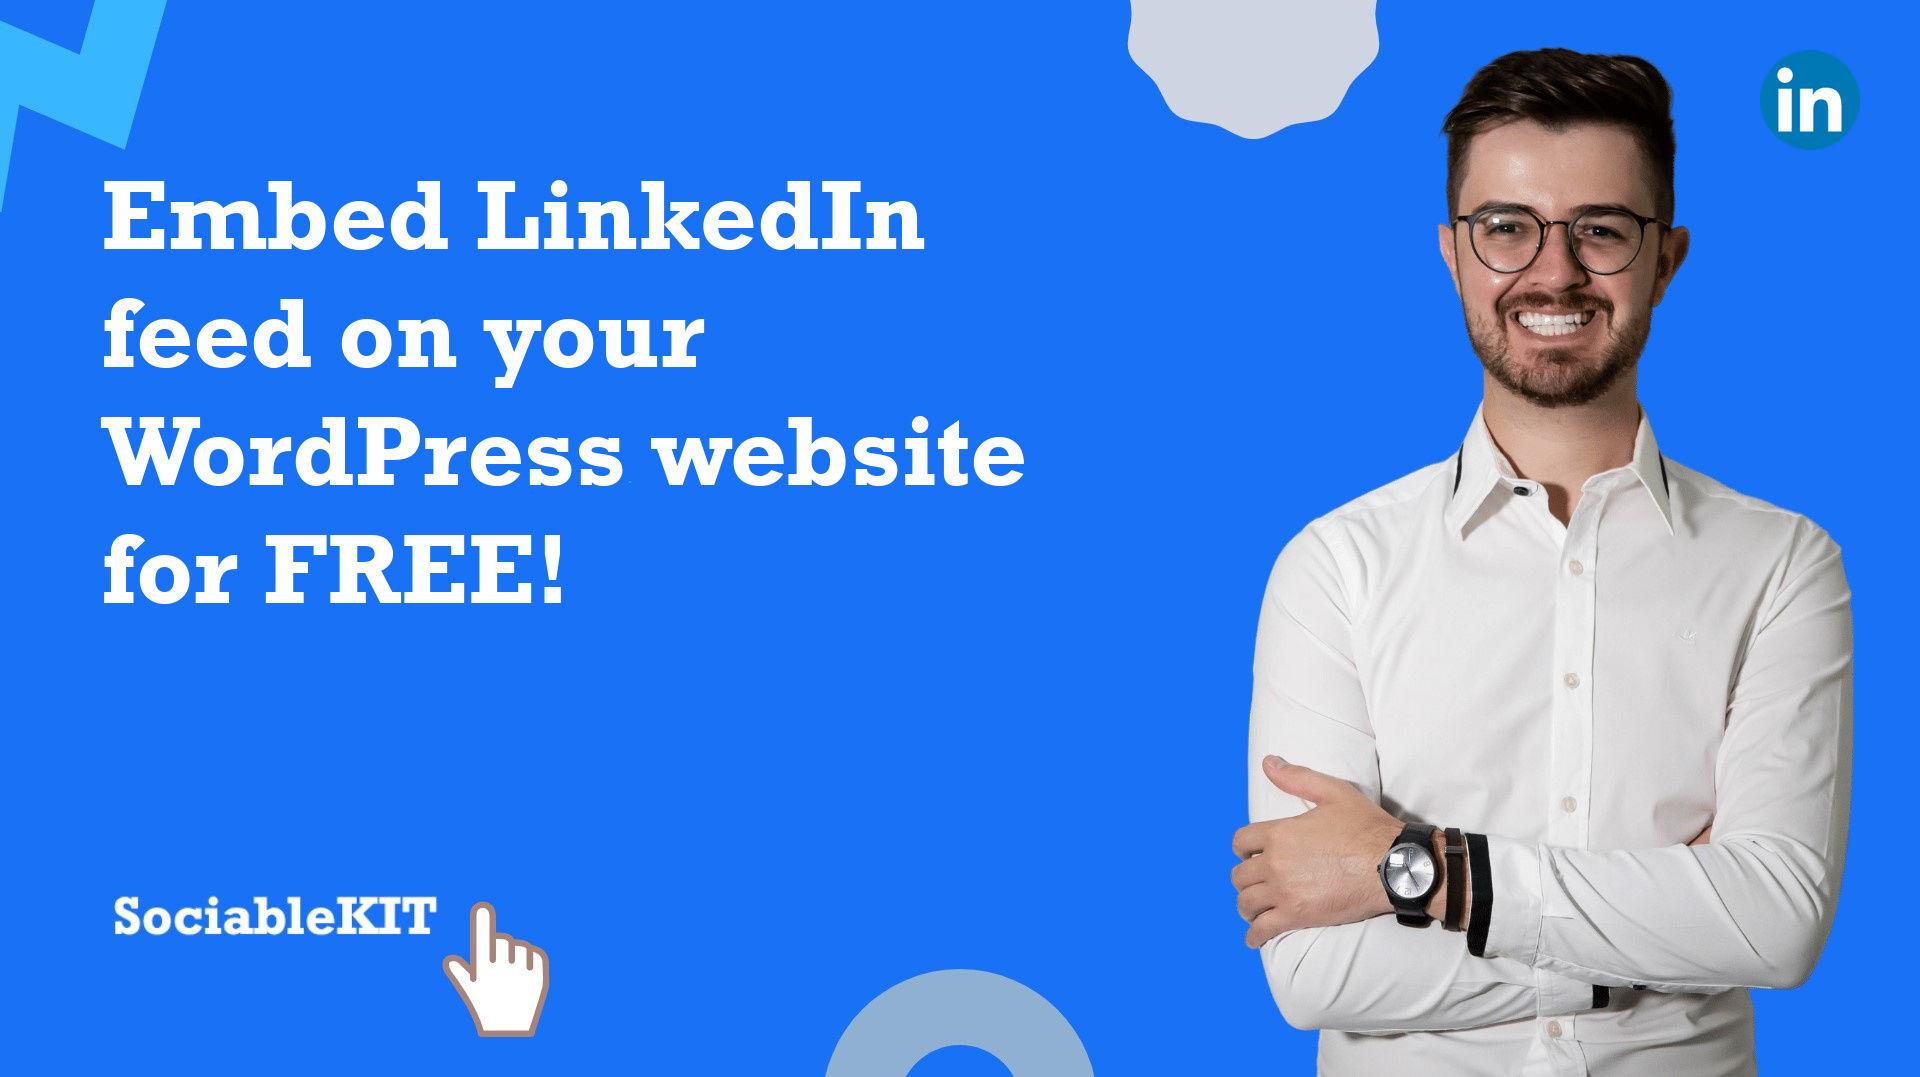 How to embed LinkedIn feed on your WordPress website for FREE?